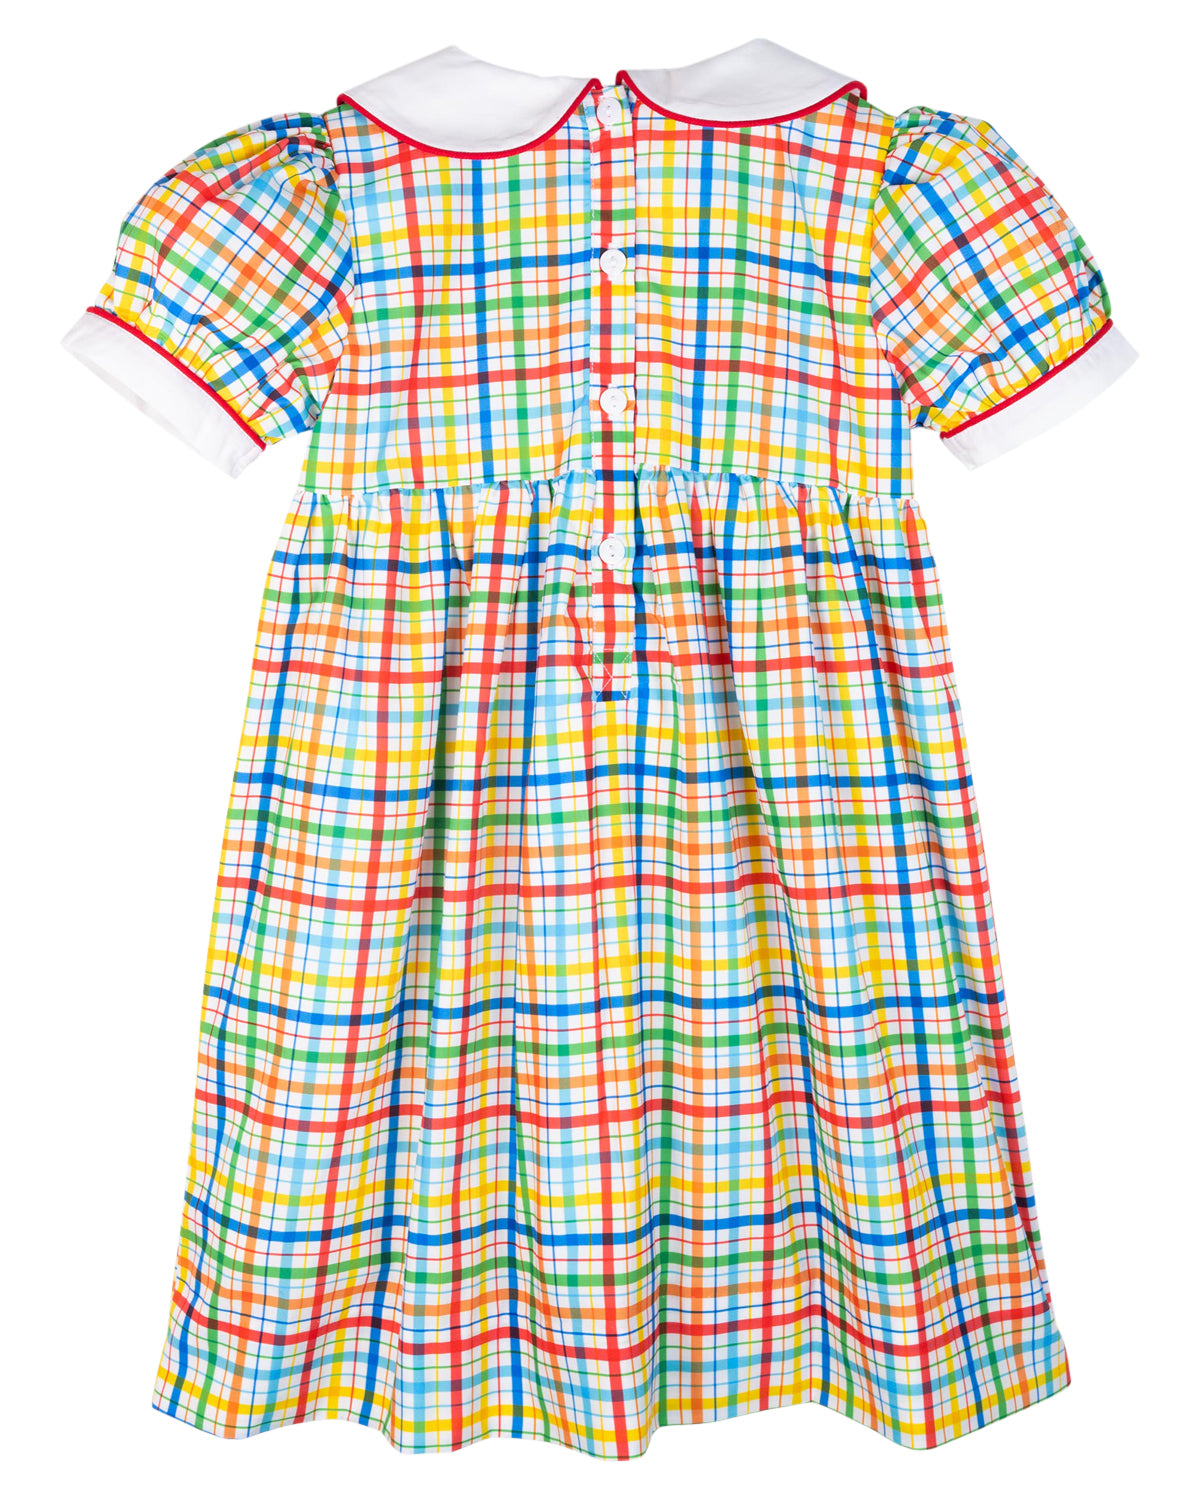 Rainbow Plaid Dress with Apple Buttons